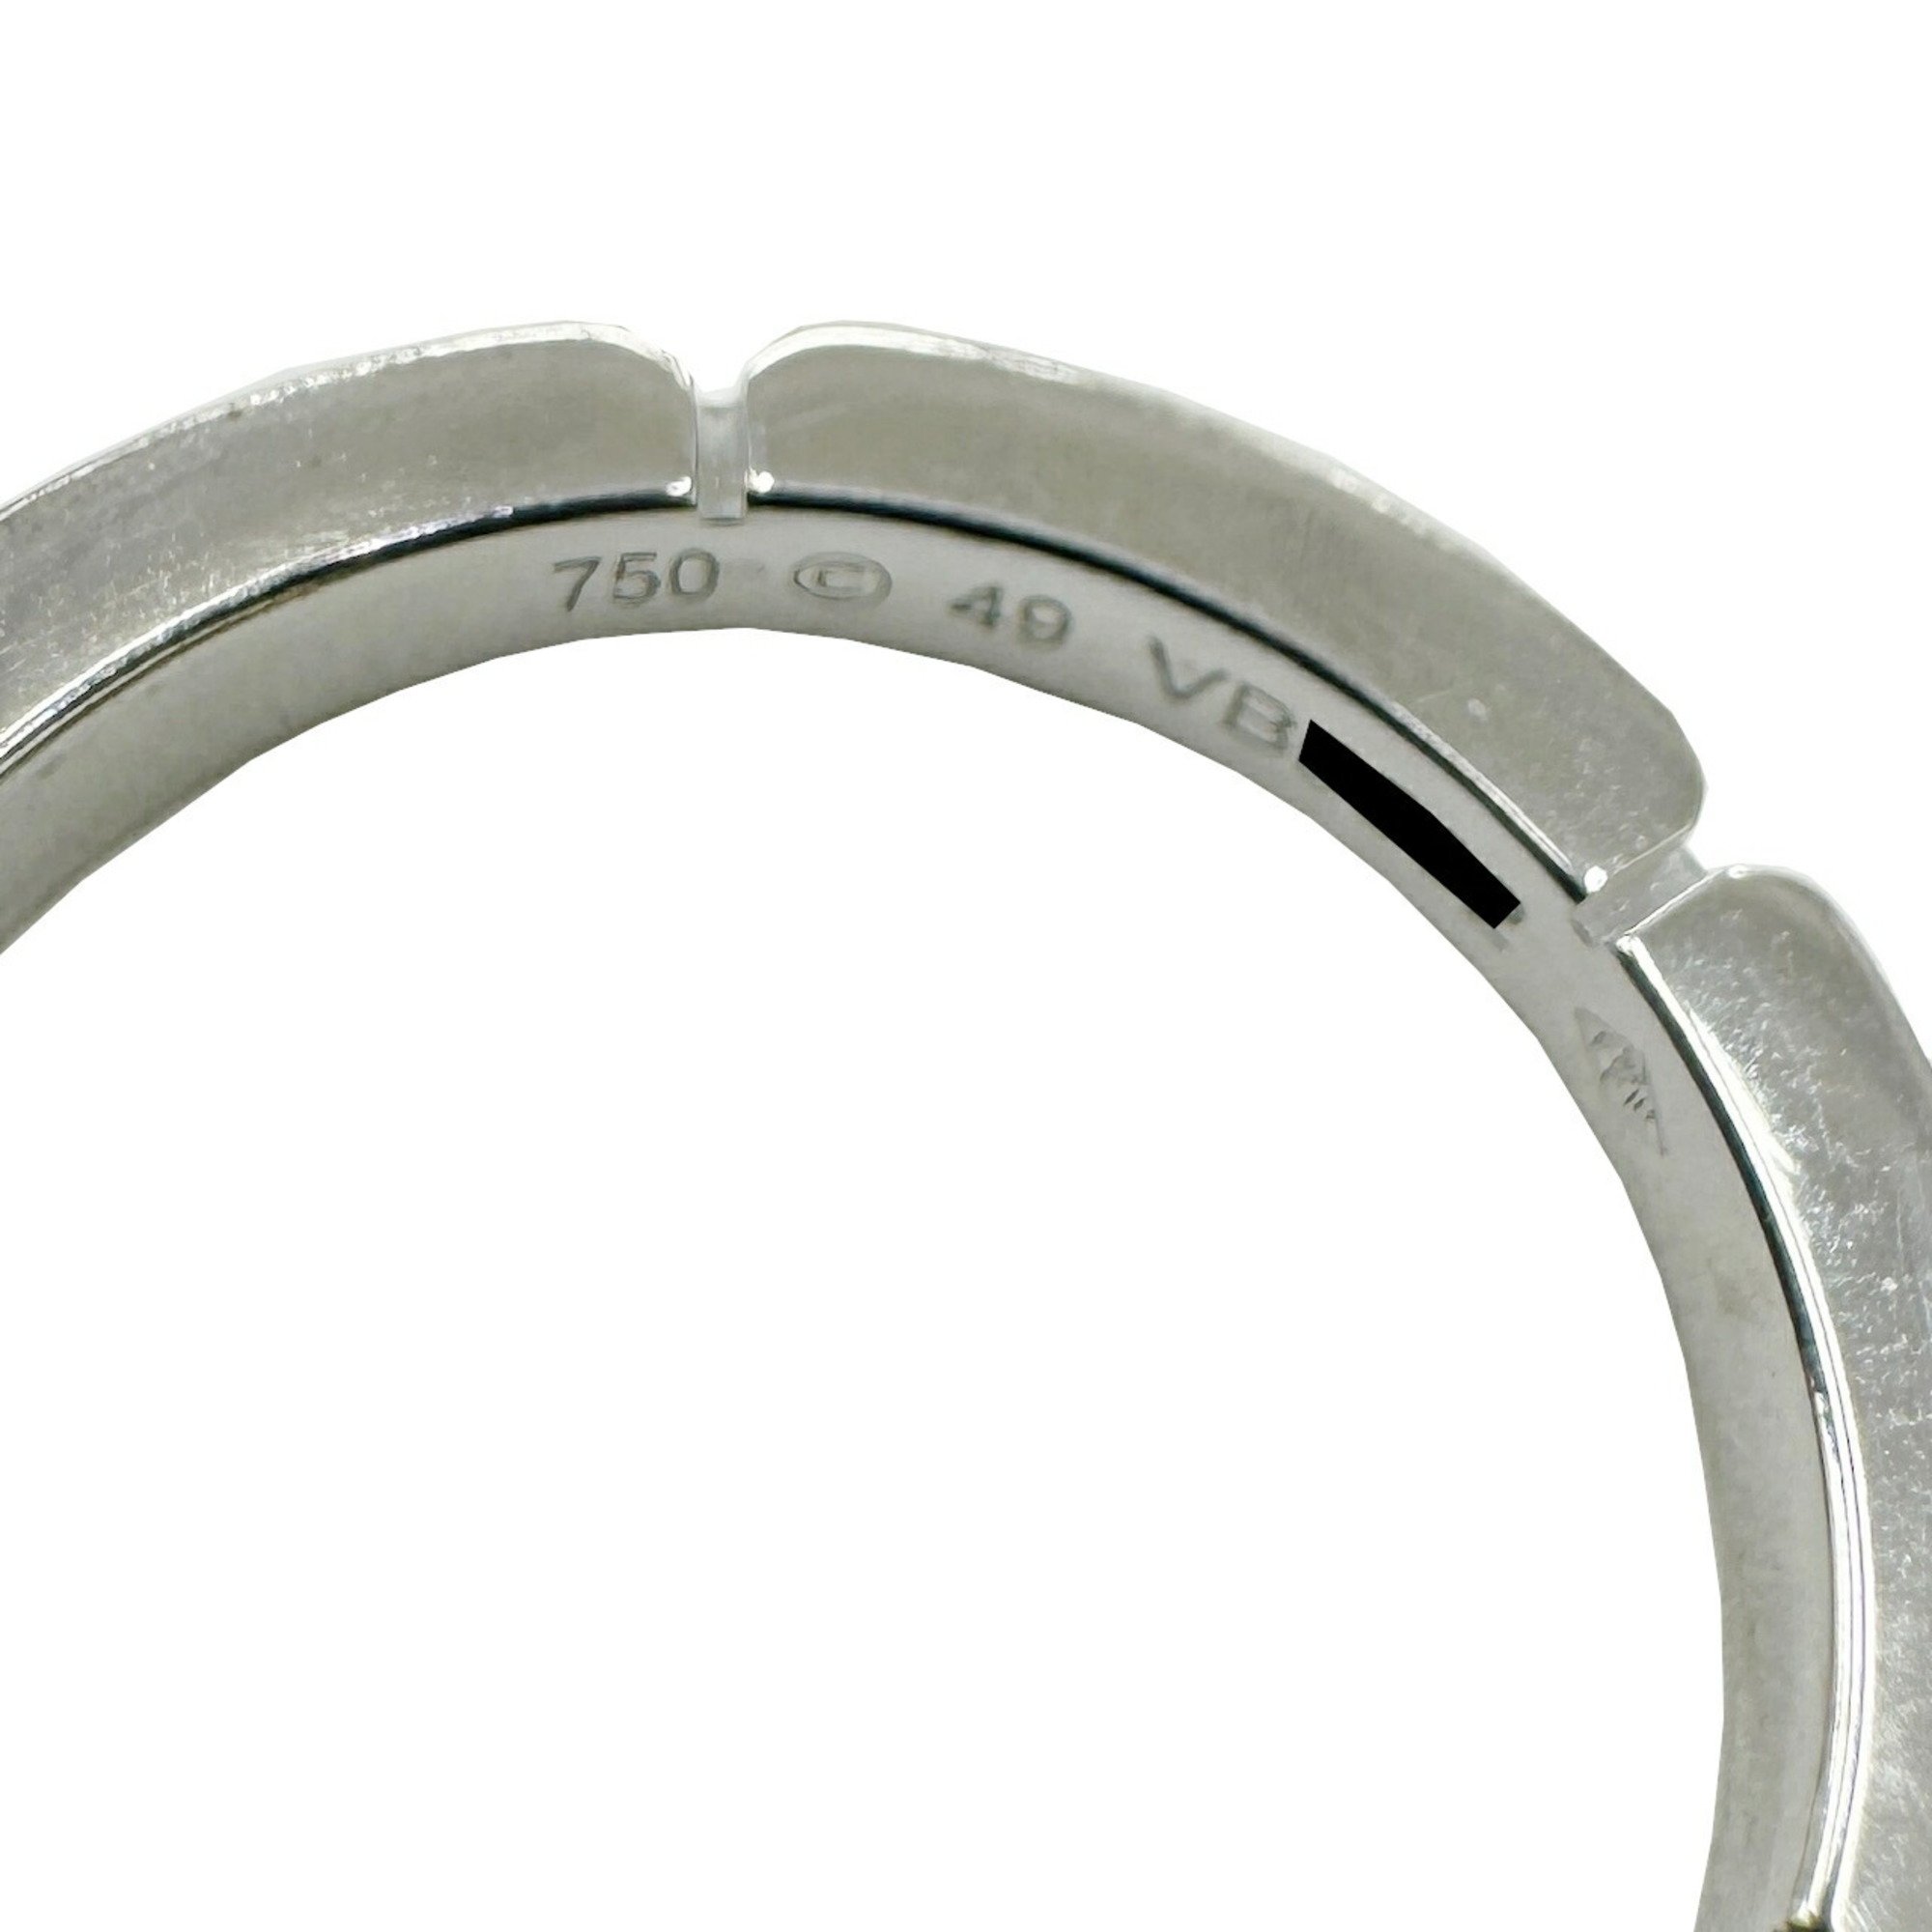 Cartier Maillon Panthère Ring Polished White Gold 750 K18WG #49 No. 49 4.1g Women's